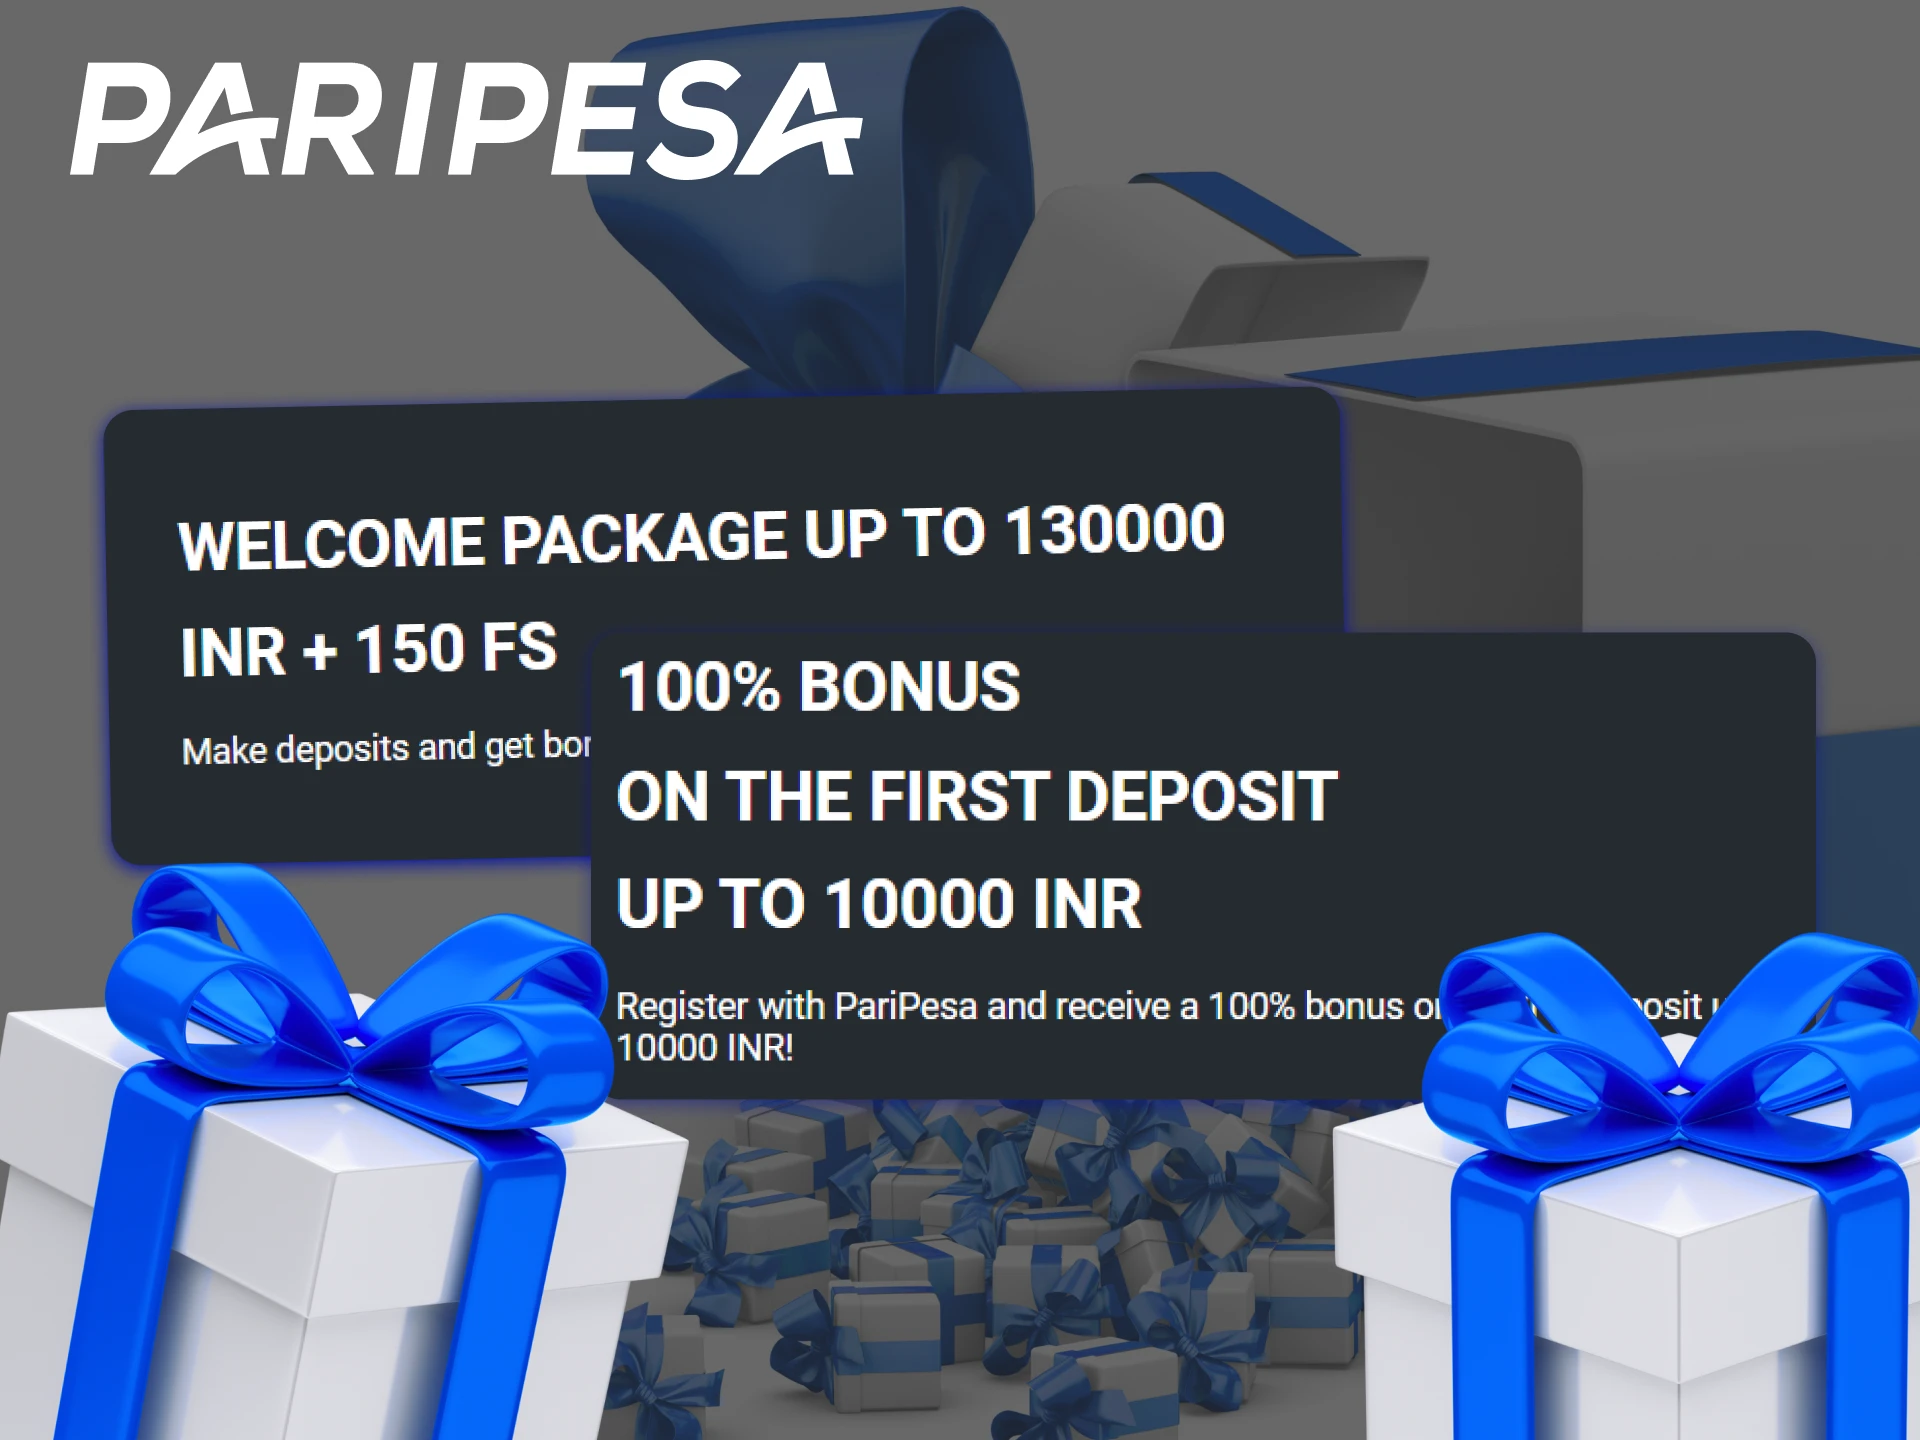 Once you register with Paripesa, you can count on a lucrative welcome bonus for sports or casino betting.